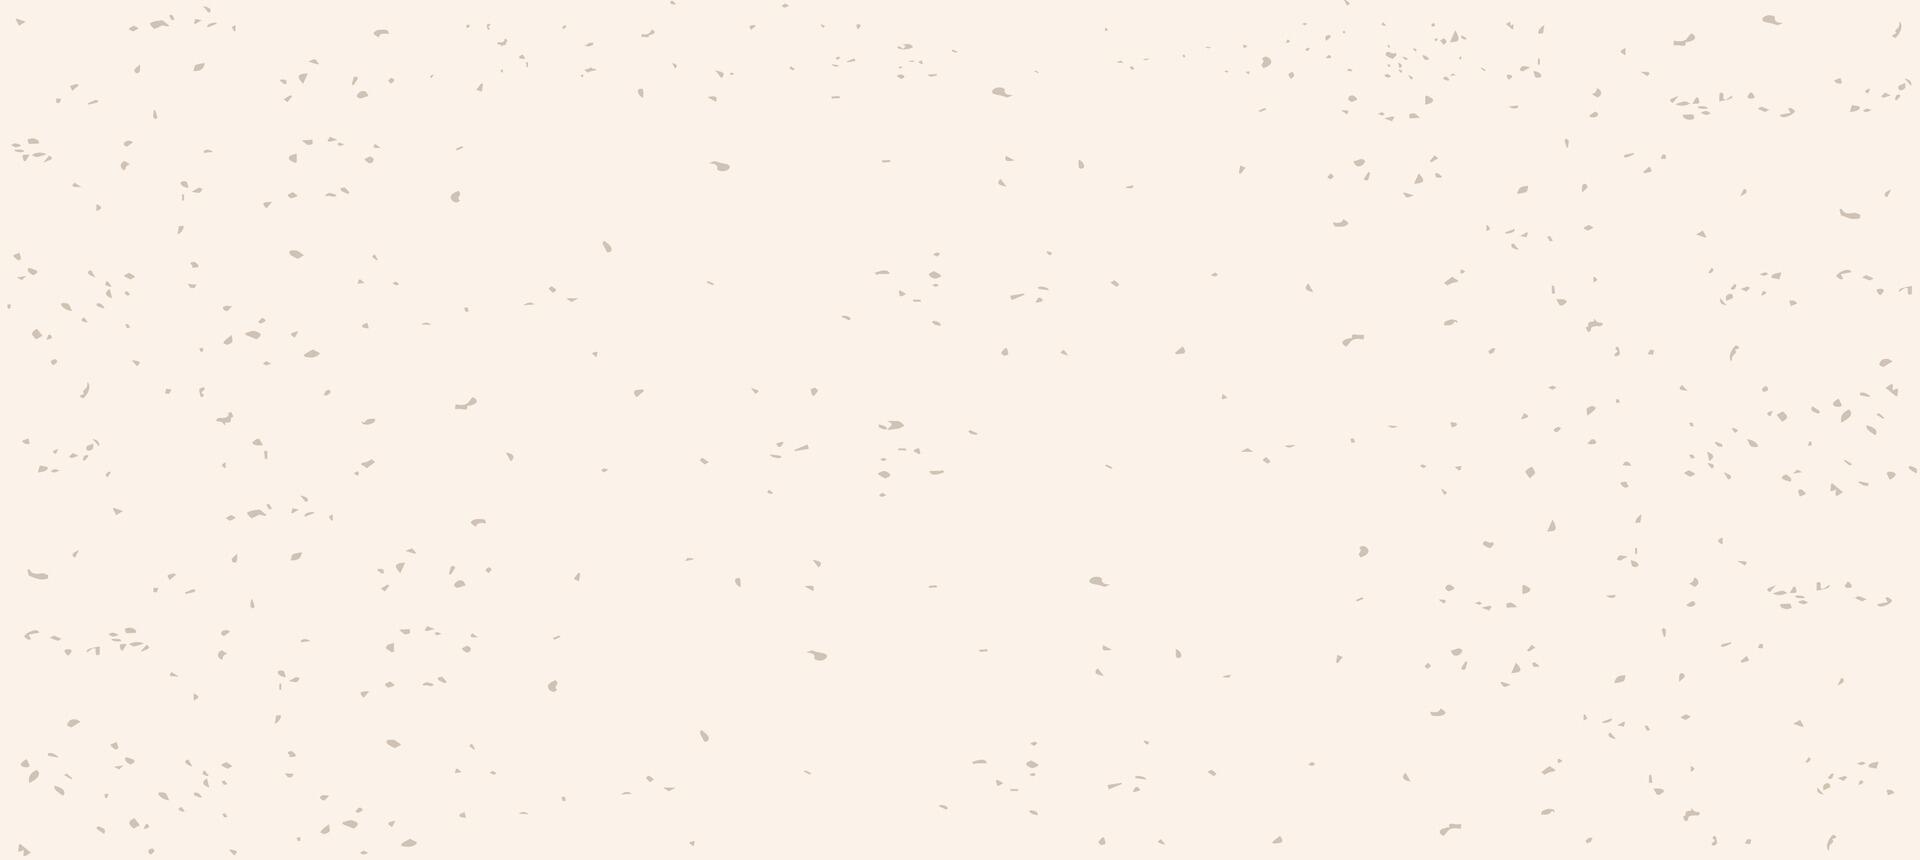 Rice paper. Vector stock illustration. Vintage grunge background with  dots and speckles. Minimalistic grainy eggshell paper texture.